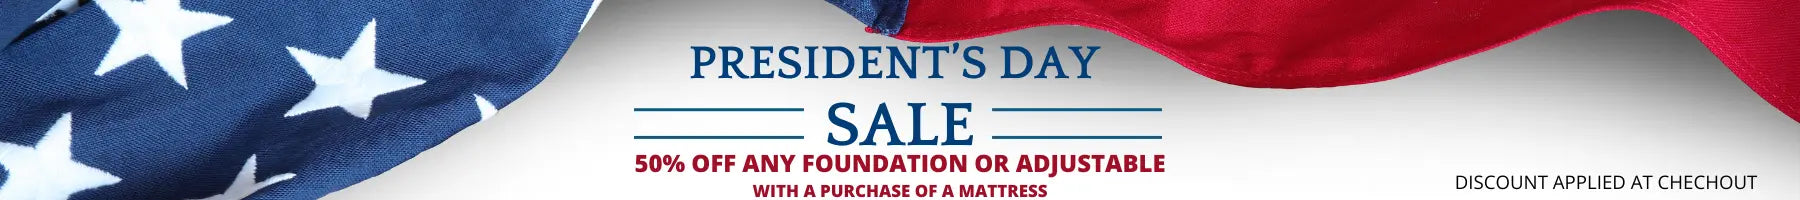 50% off any foundation or adjustable with mattress purchase for President's Day.